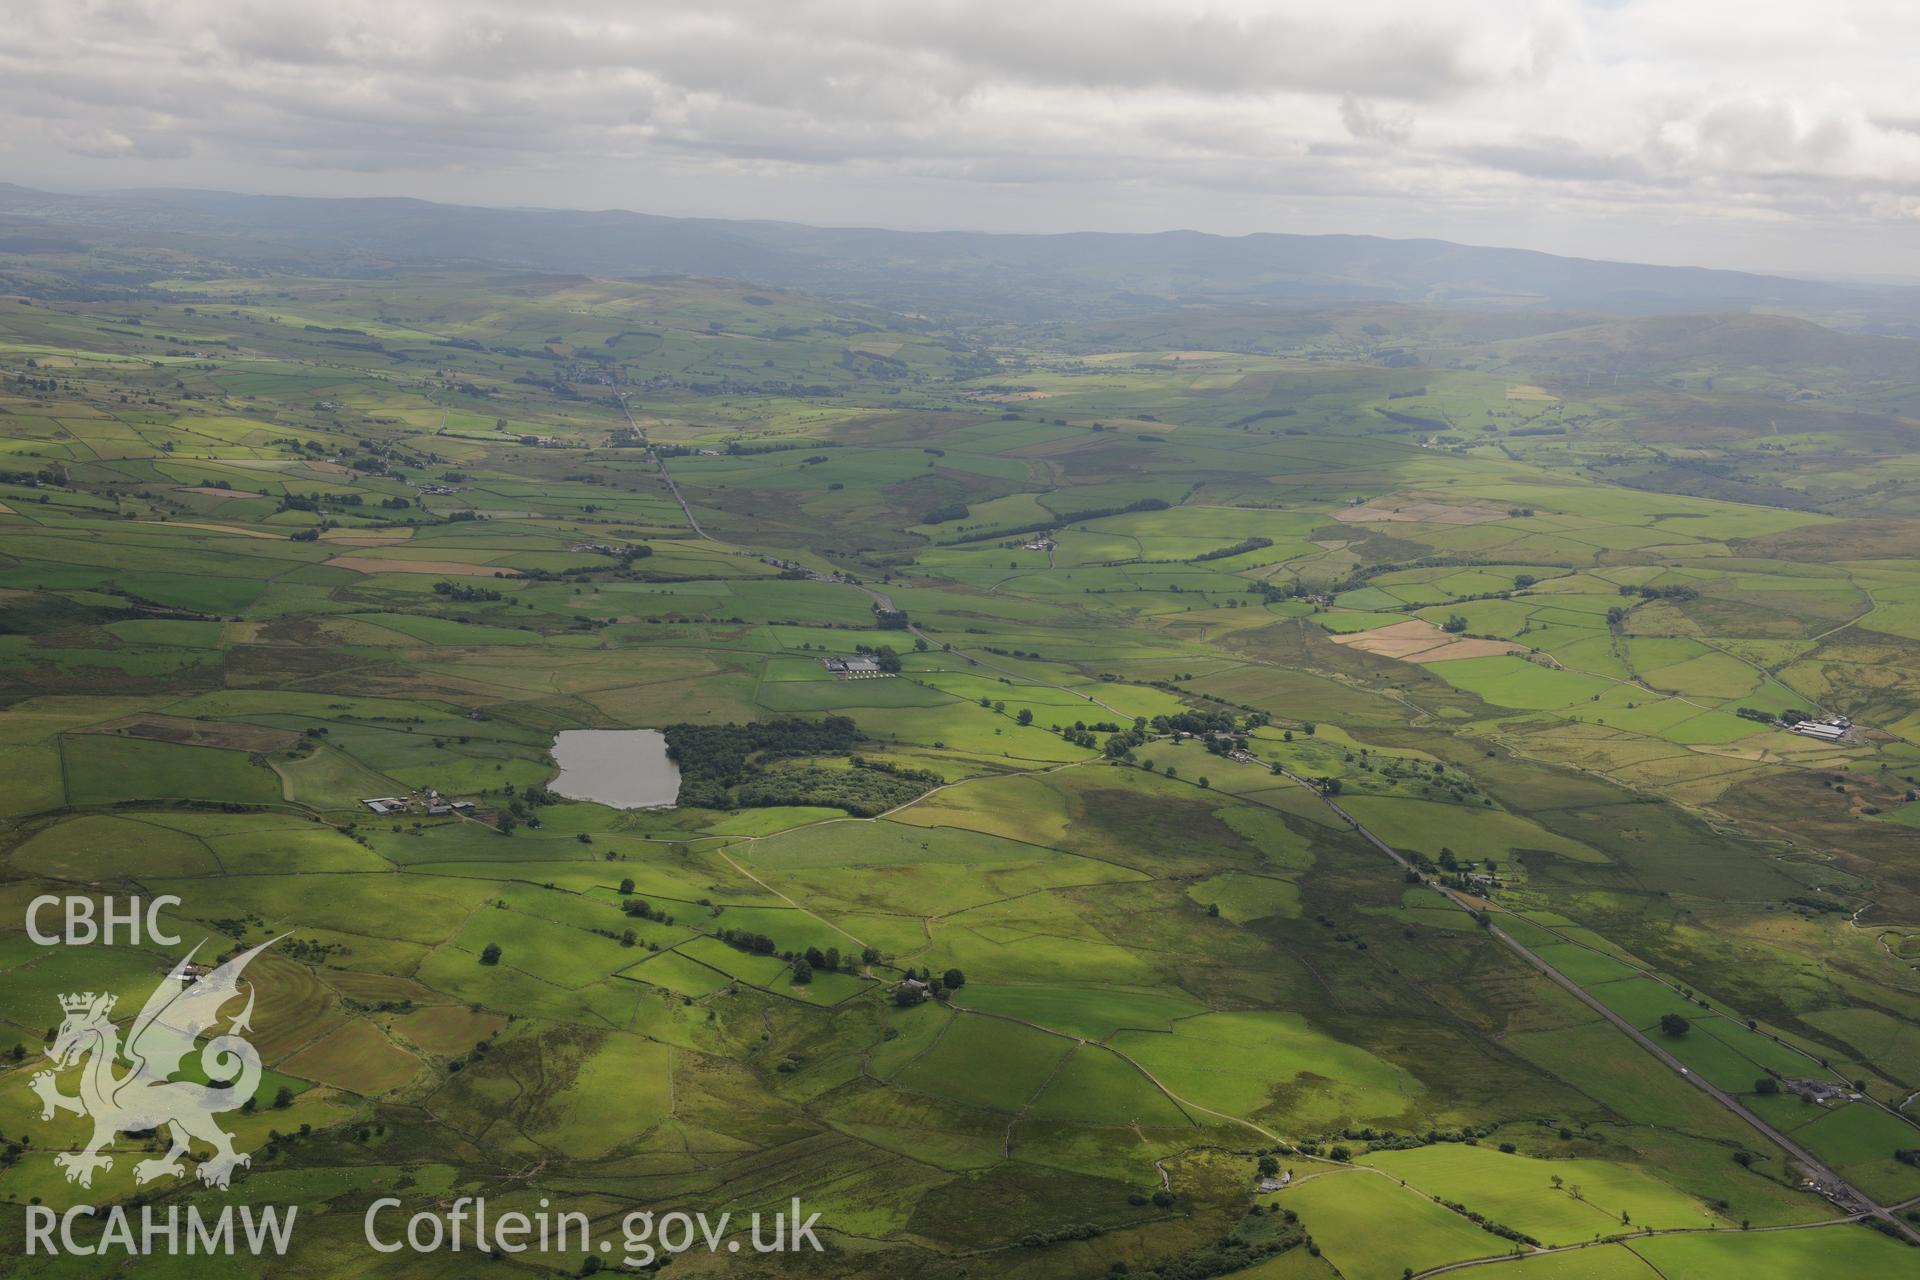 Llyn y Cwrt lake, Llyn y Cwrt farmhouse and Bryn Heilyn house. Oblique aerial photograph taken during the Royal Commission's programme of archaeological aerial reconnaissance by Toby Driver on 30th July 2015.